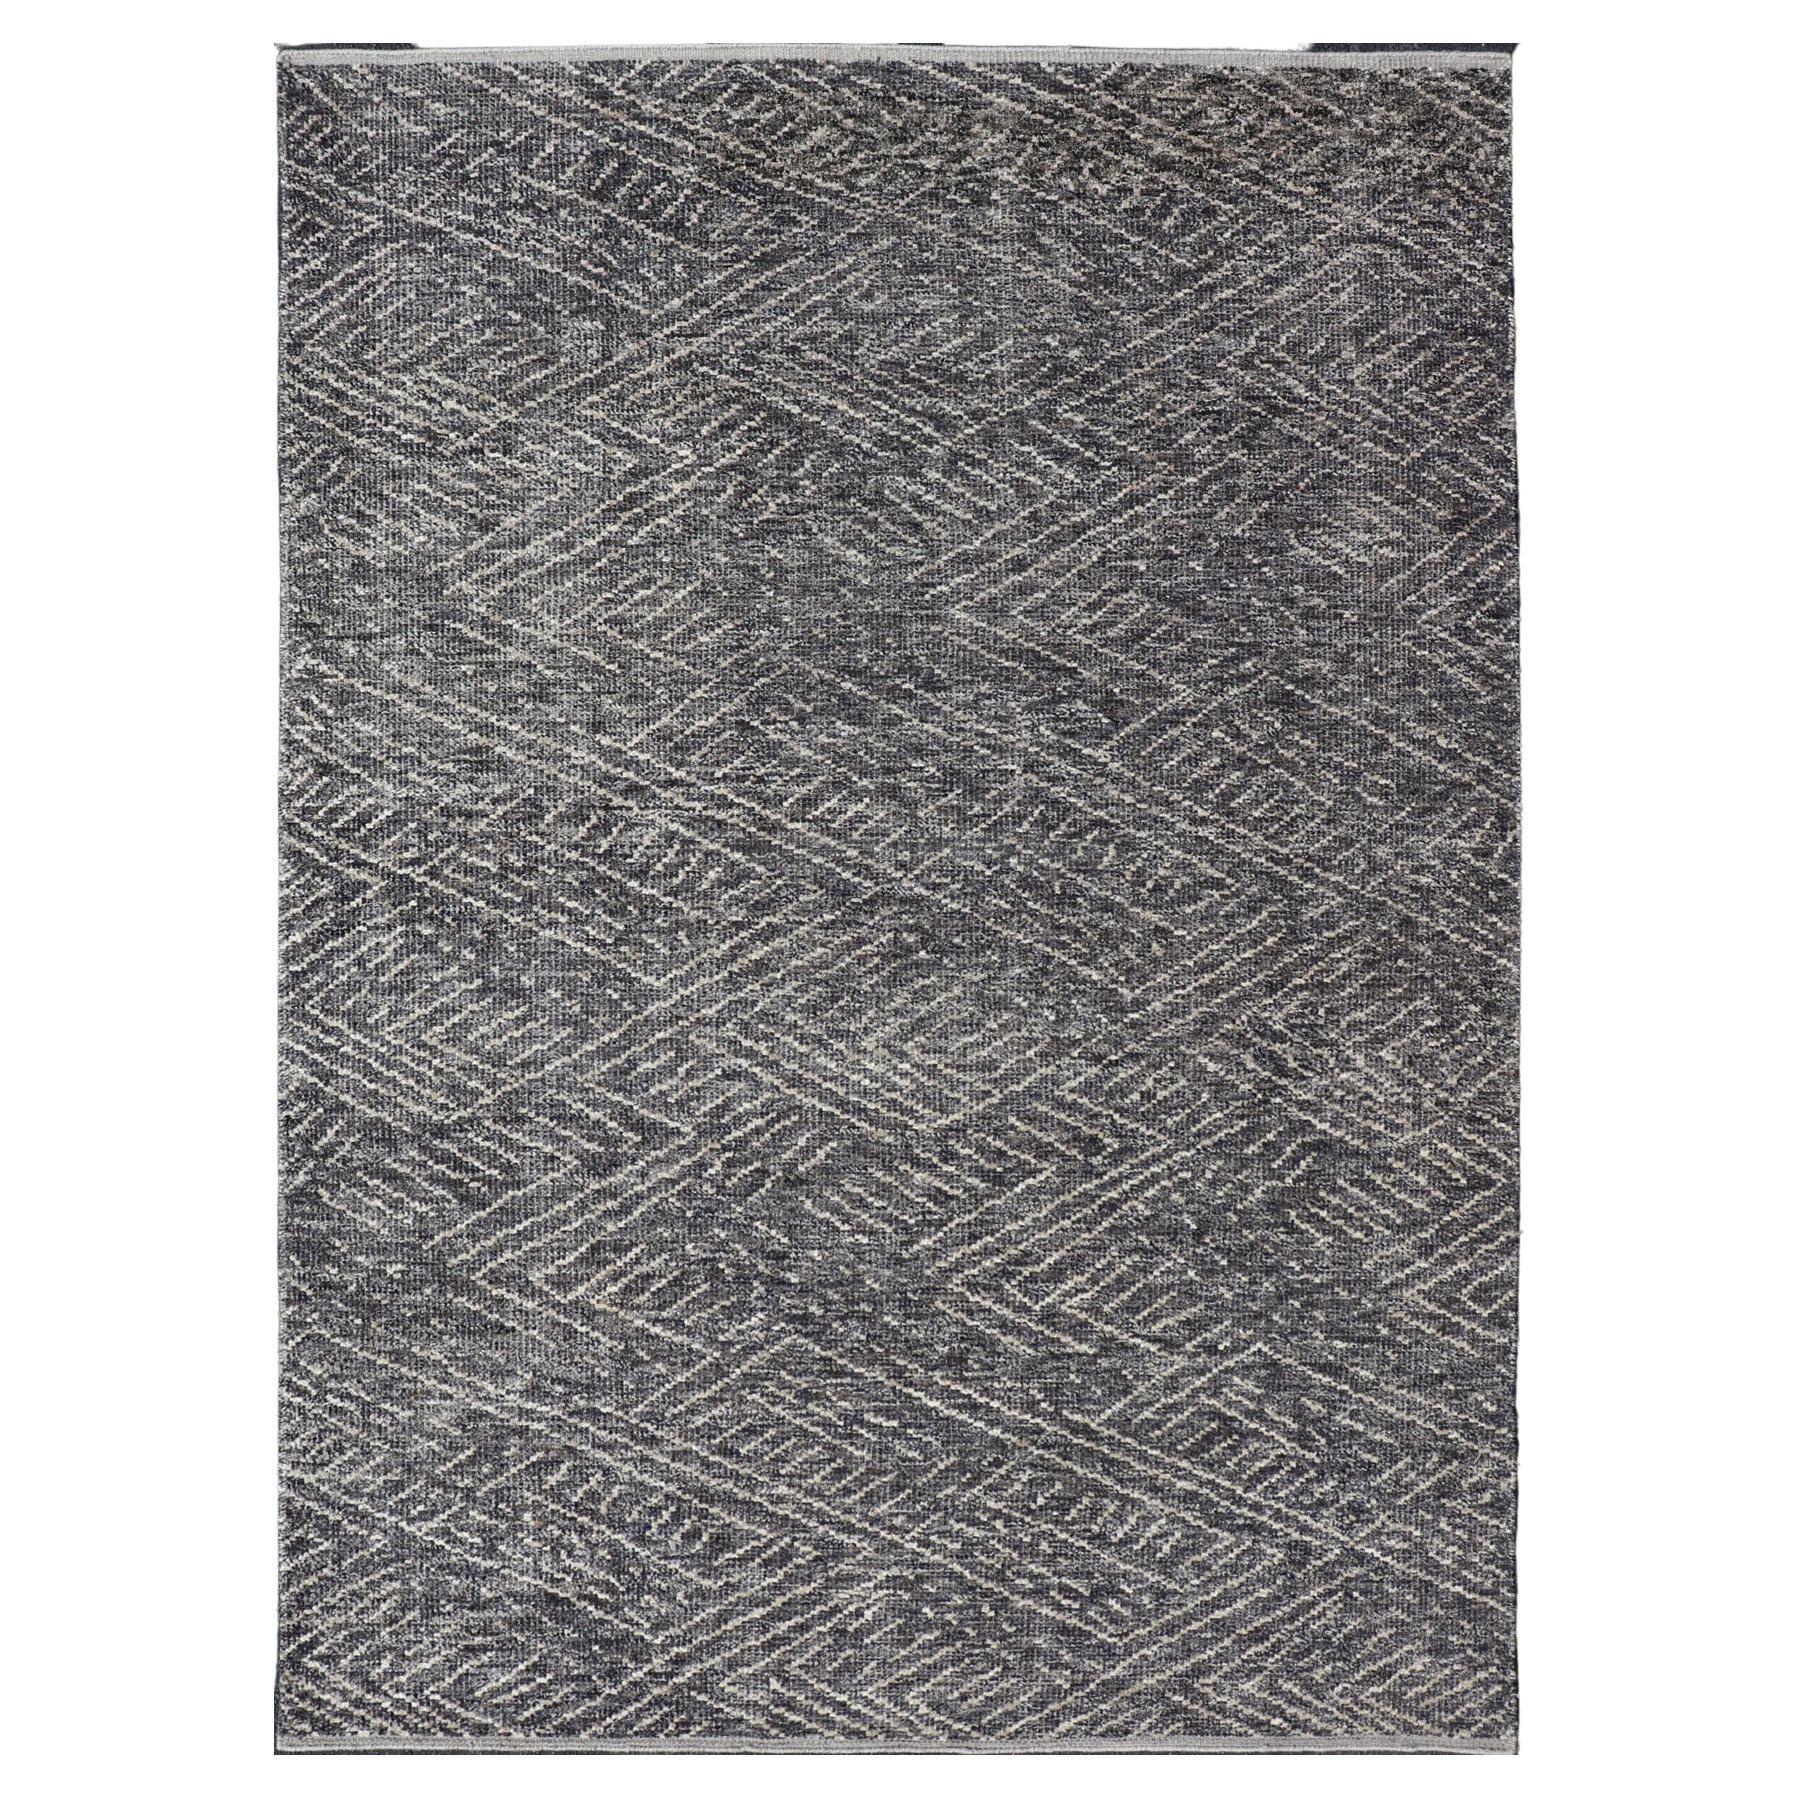 Indian Modern Casual Gray-Blue Area Rug With Minimal Crosshatch Design For Sale